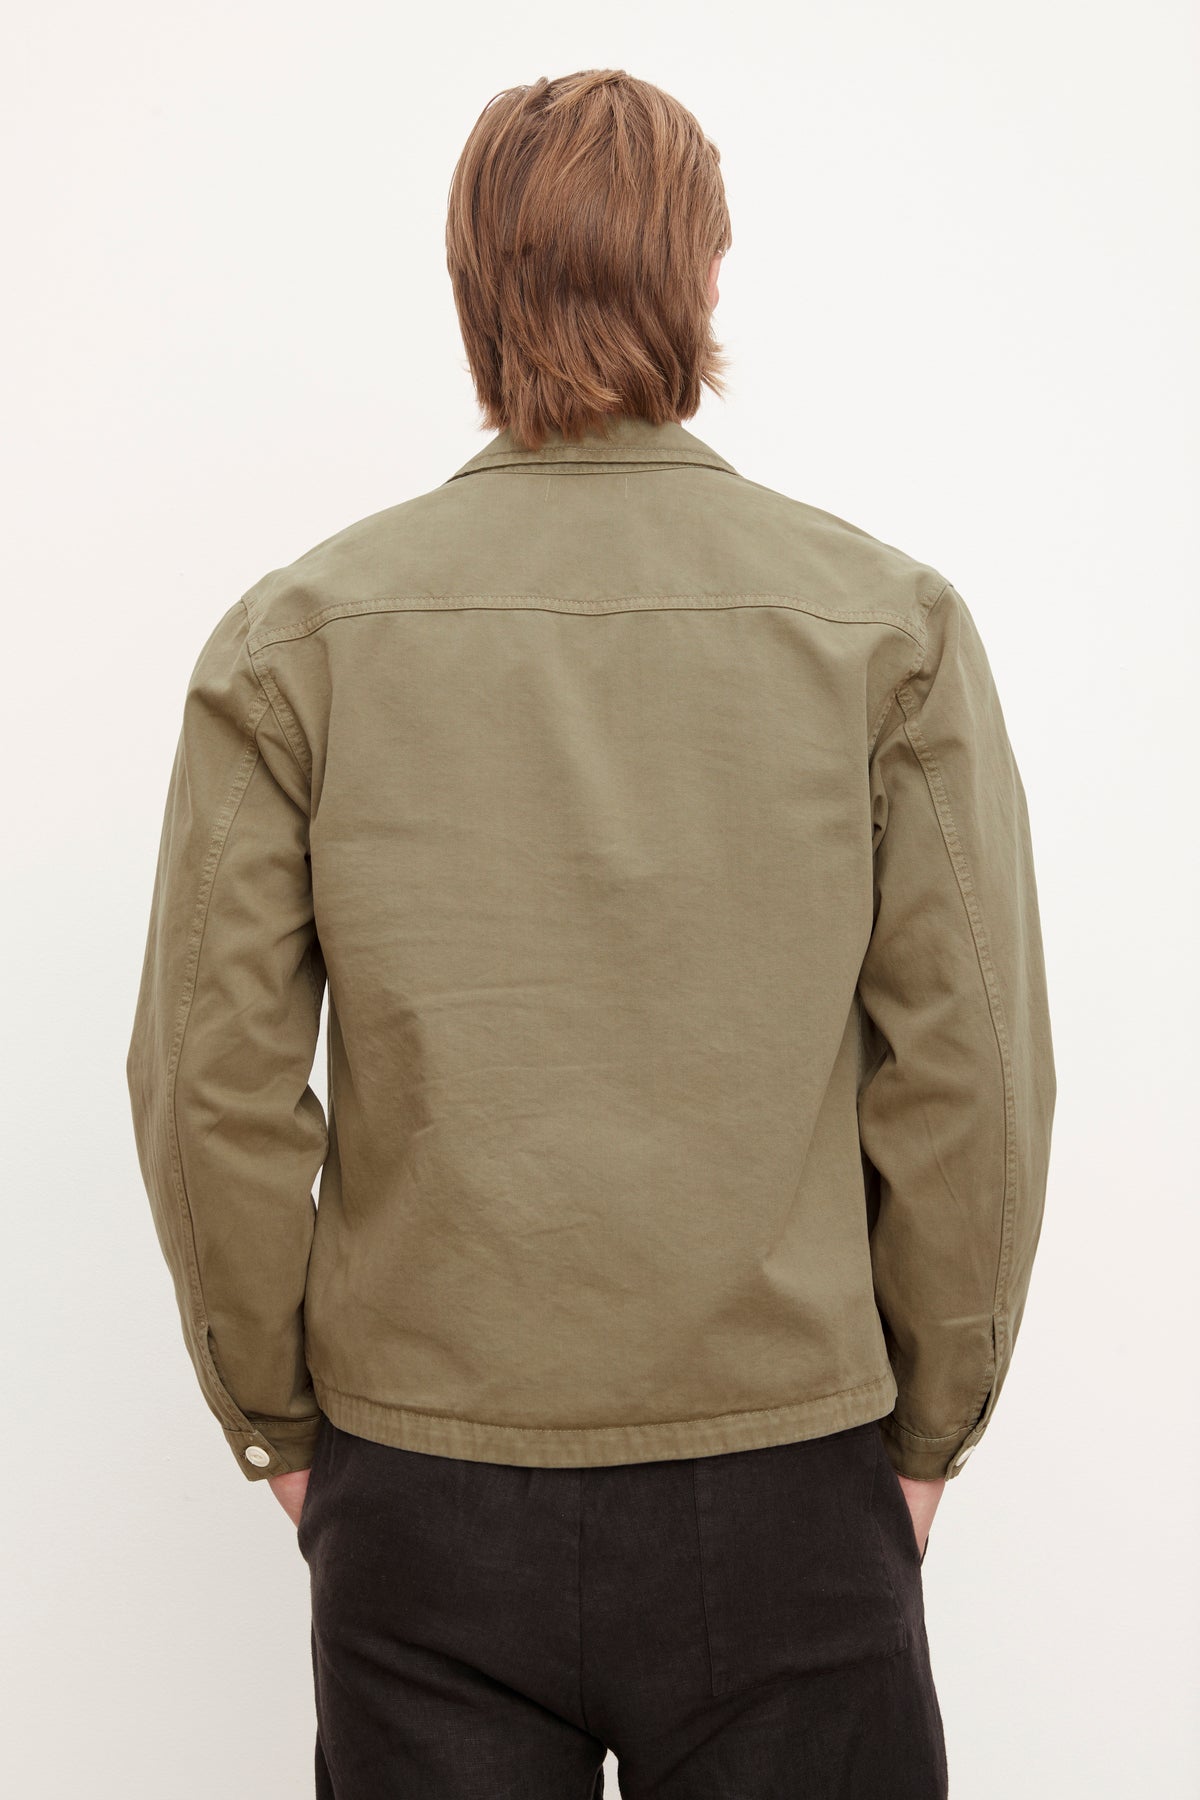   The back view of a man wearing a FLANNERY SANDED TWILL BUTTON-UP JACKET from Velvet by Graham & Spencer. 